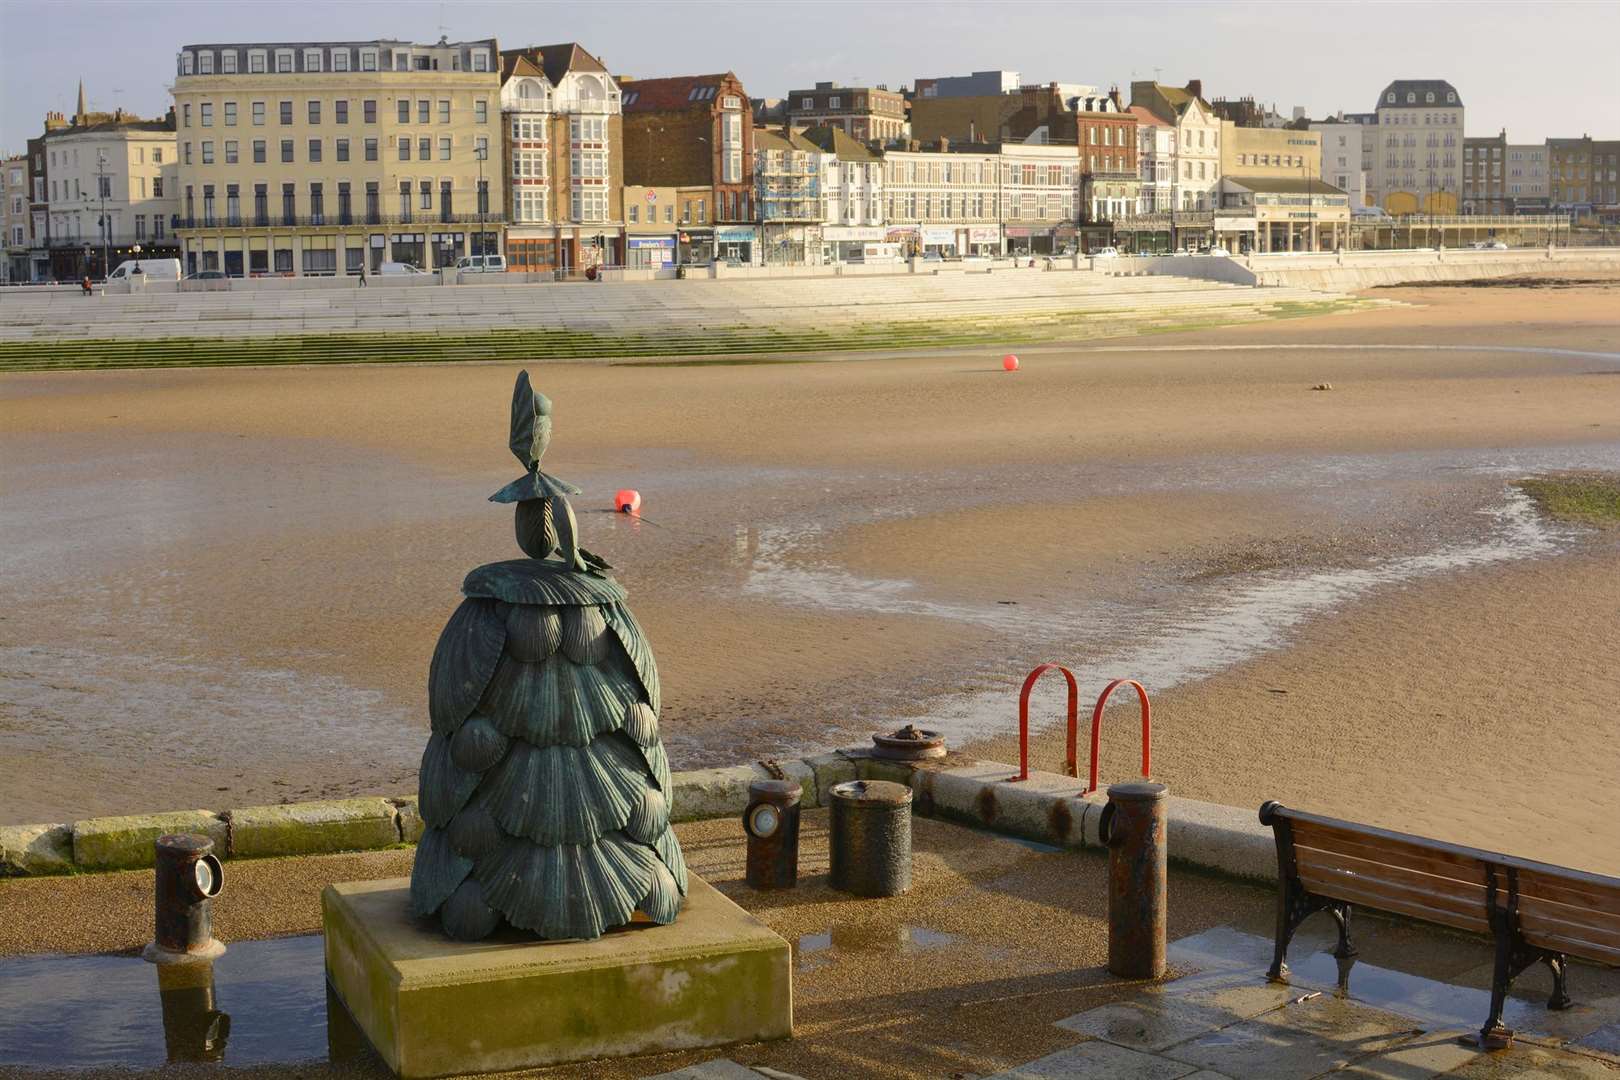 The government announced £100,000 in funding for various projects to boost tourism and economic growth in Thanet. Pictured is Margate's main sands